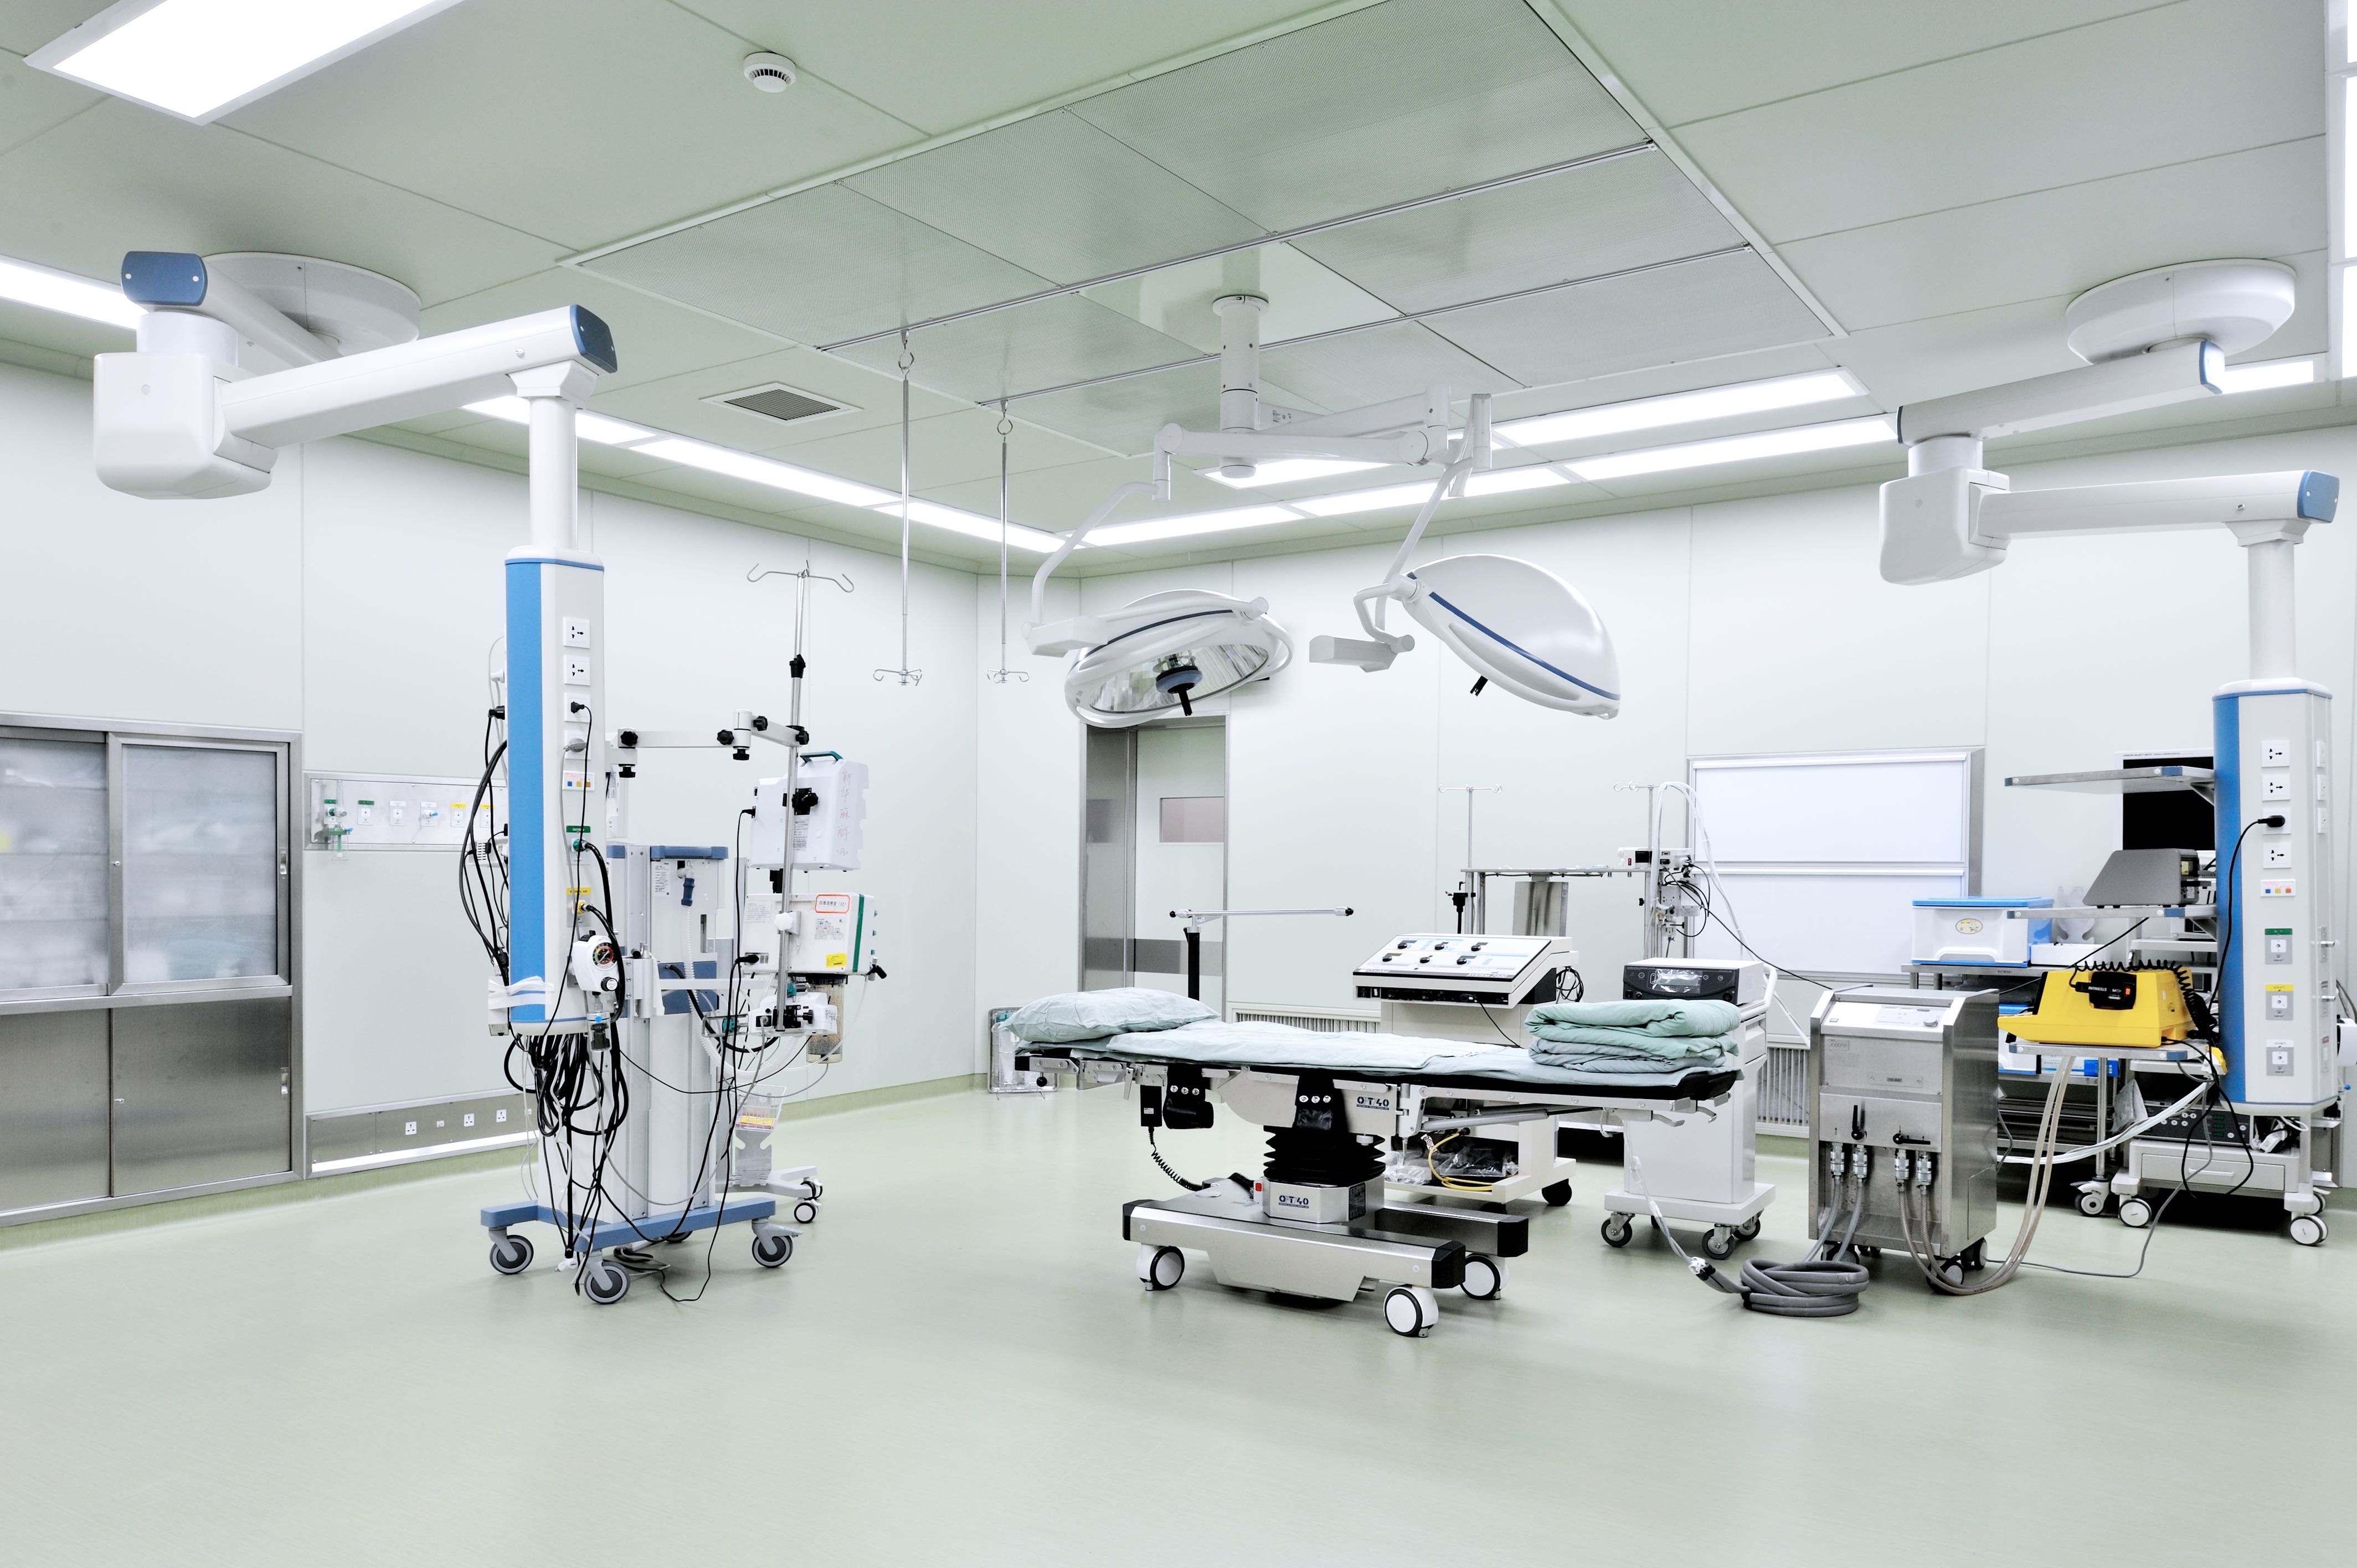 >Installation of Clean Air Conditioning Equipment in 1000 Class Operating Room